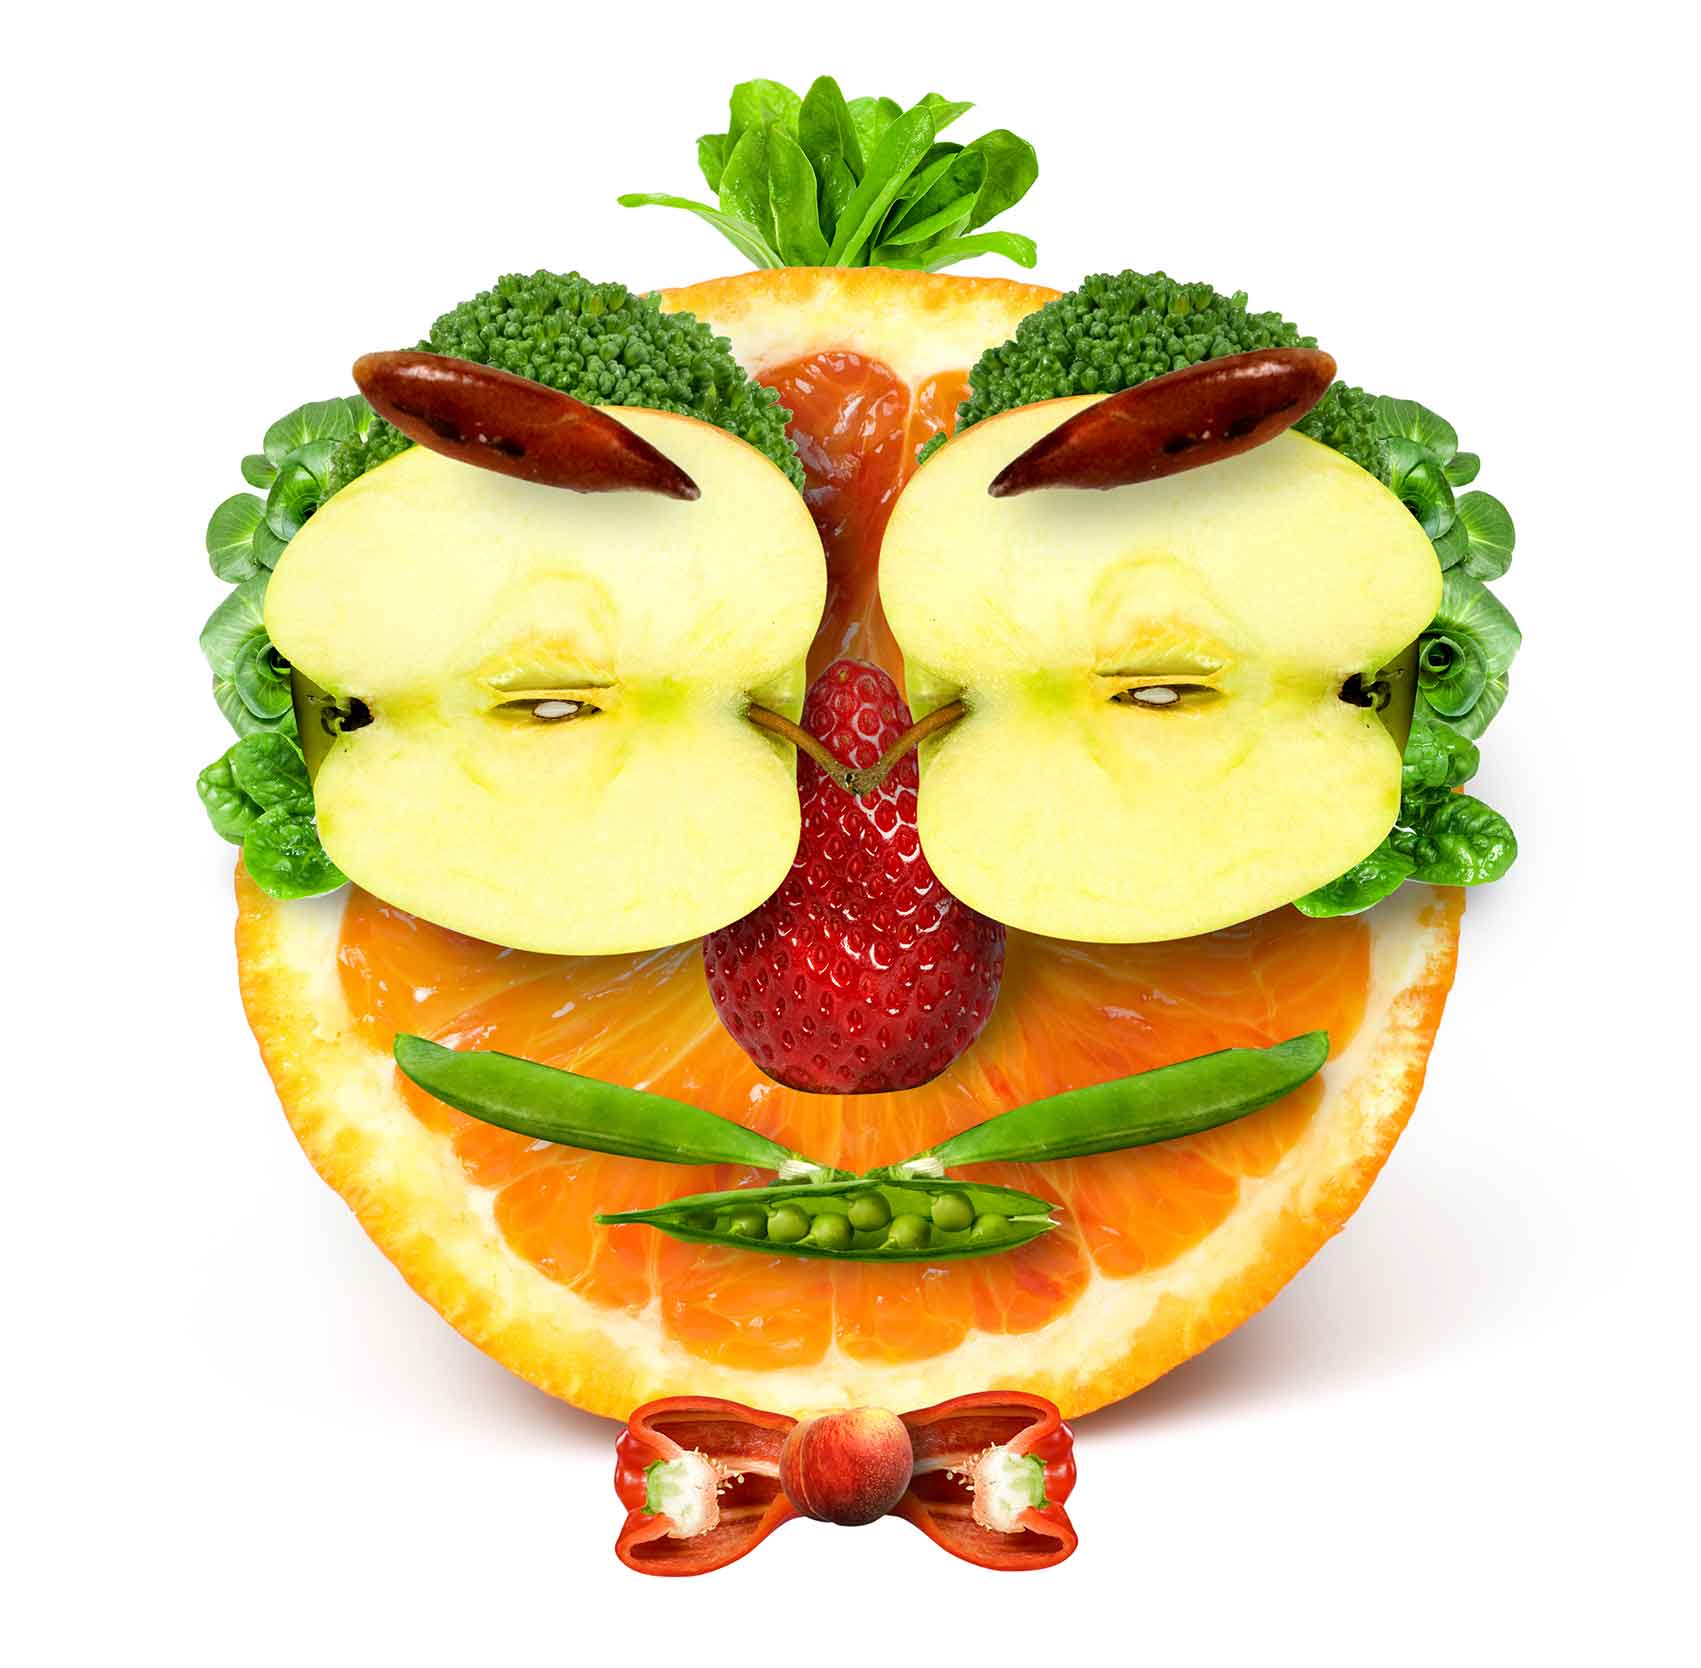 A humorous face made from various fruit and vegetables.